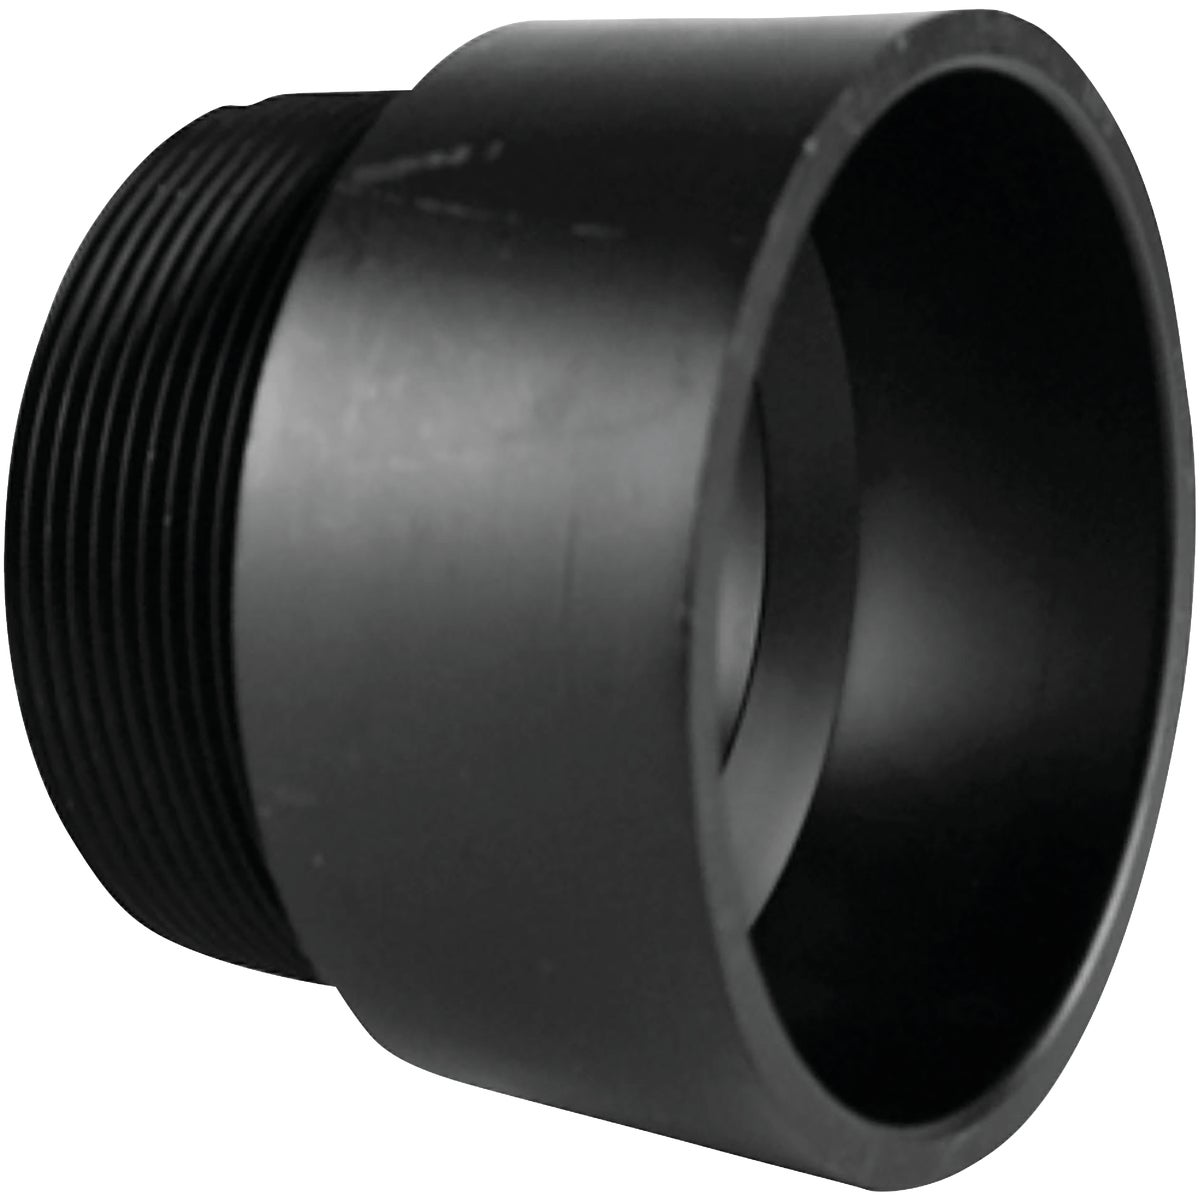 4″ ABS MALE ADAPTER